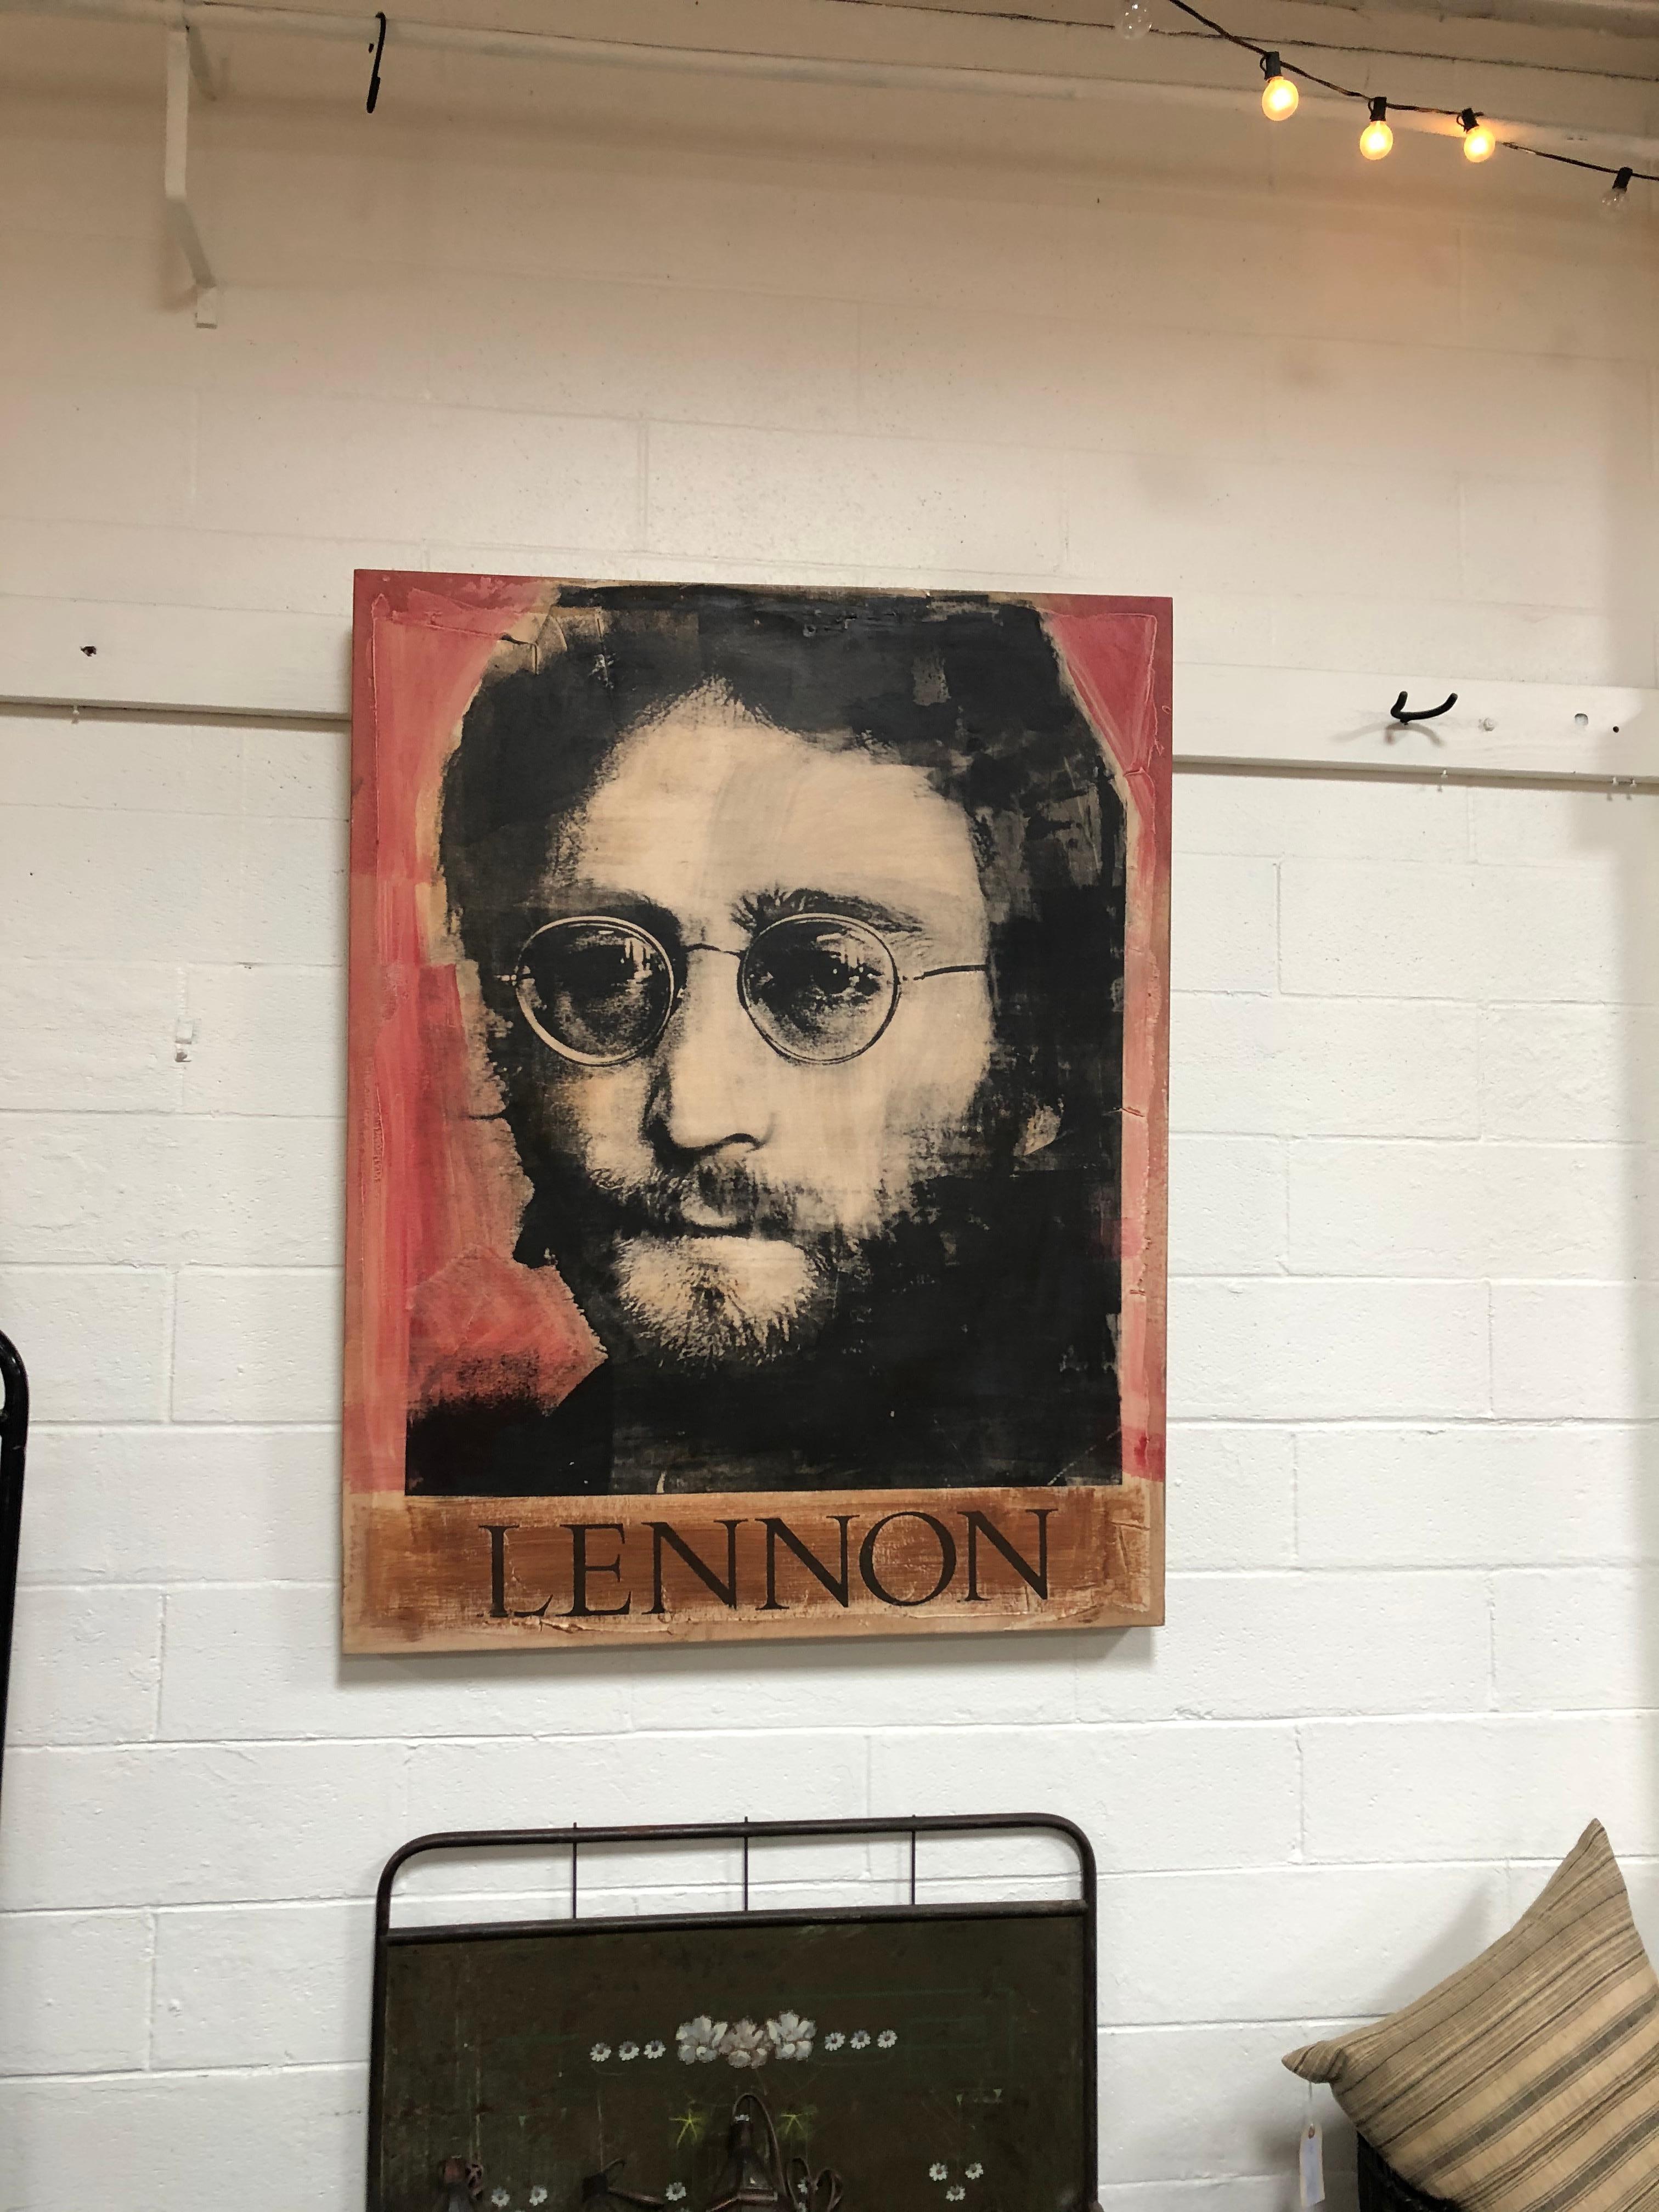 Large artwork piece featuring John Lennon on painted canvas. Red, black, and orange color scheme.